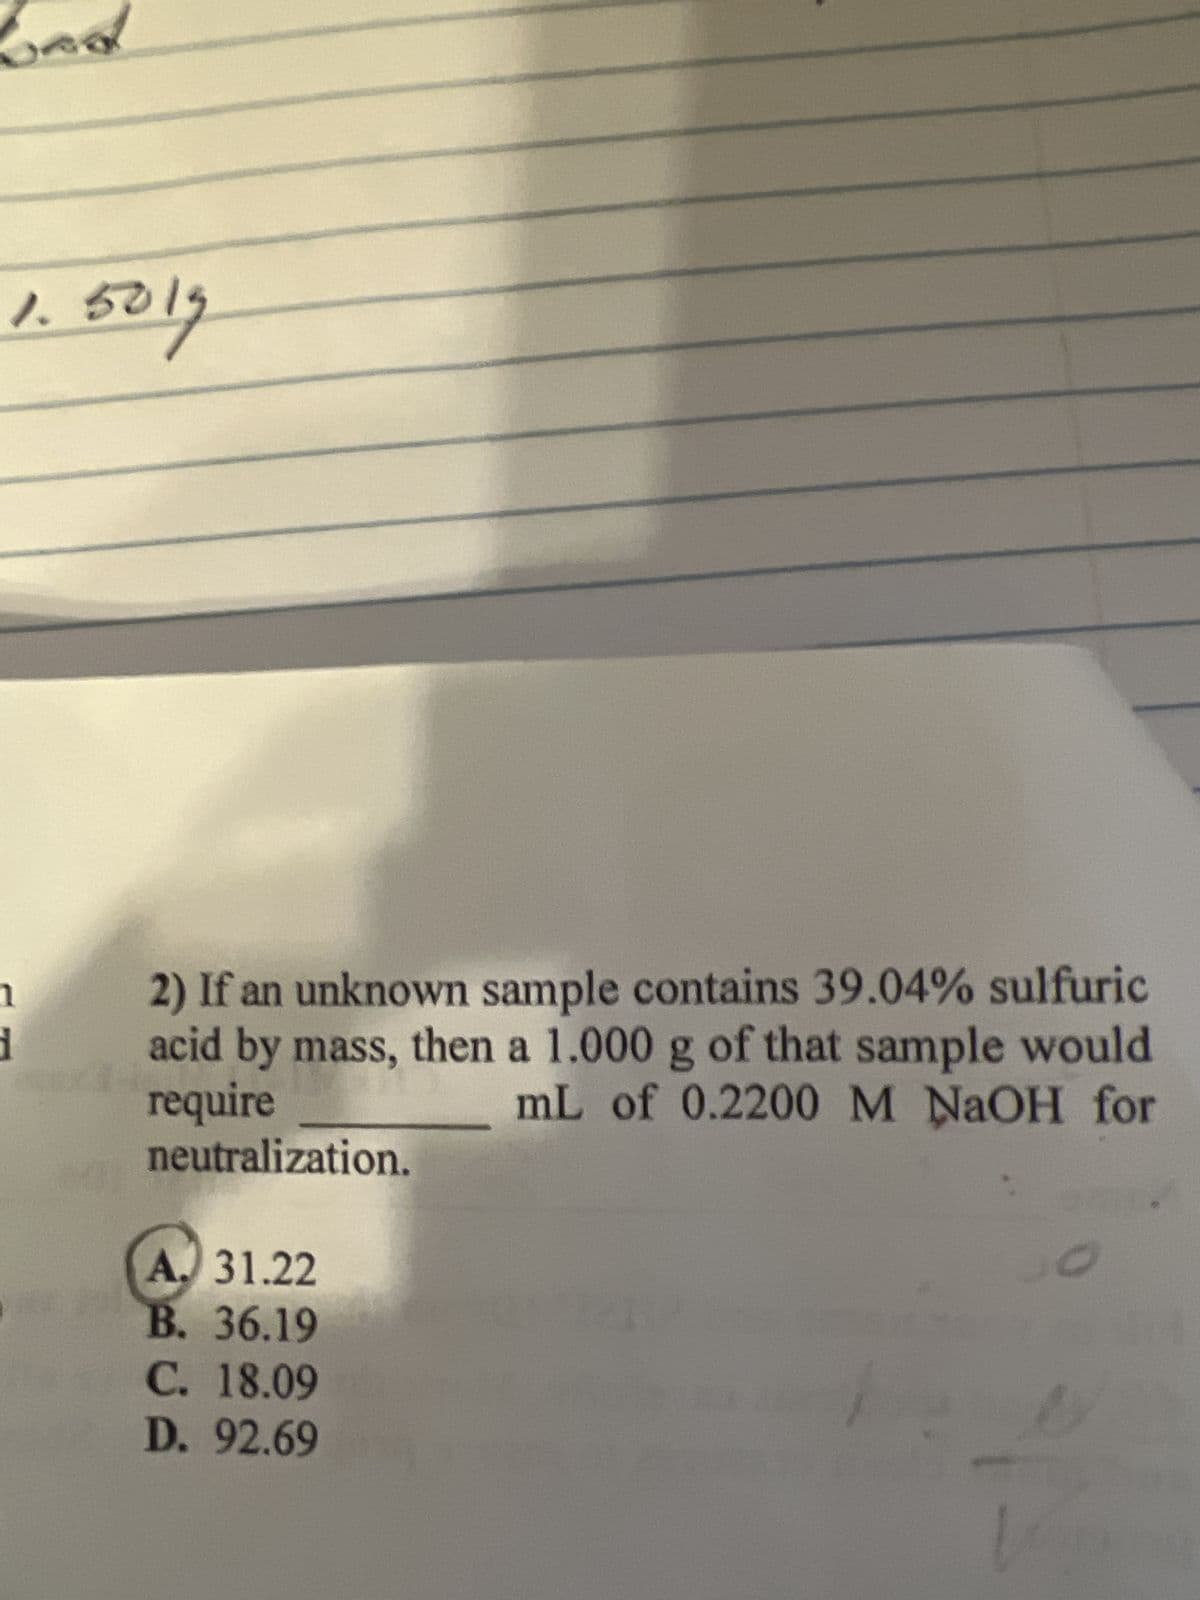 1.5019
1
d
2) If an unknown sample contains 39.04% sulfuric
acid by mass, then a 1.000 g of that sample would
require
mL of 0.2200 M NaOH for
neutralization.
A. 31.22
B. 36.19
C. 18.09
D. 92.69